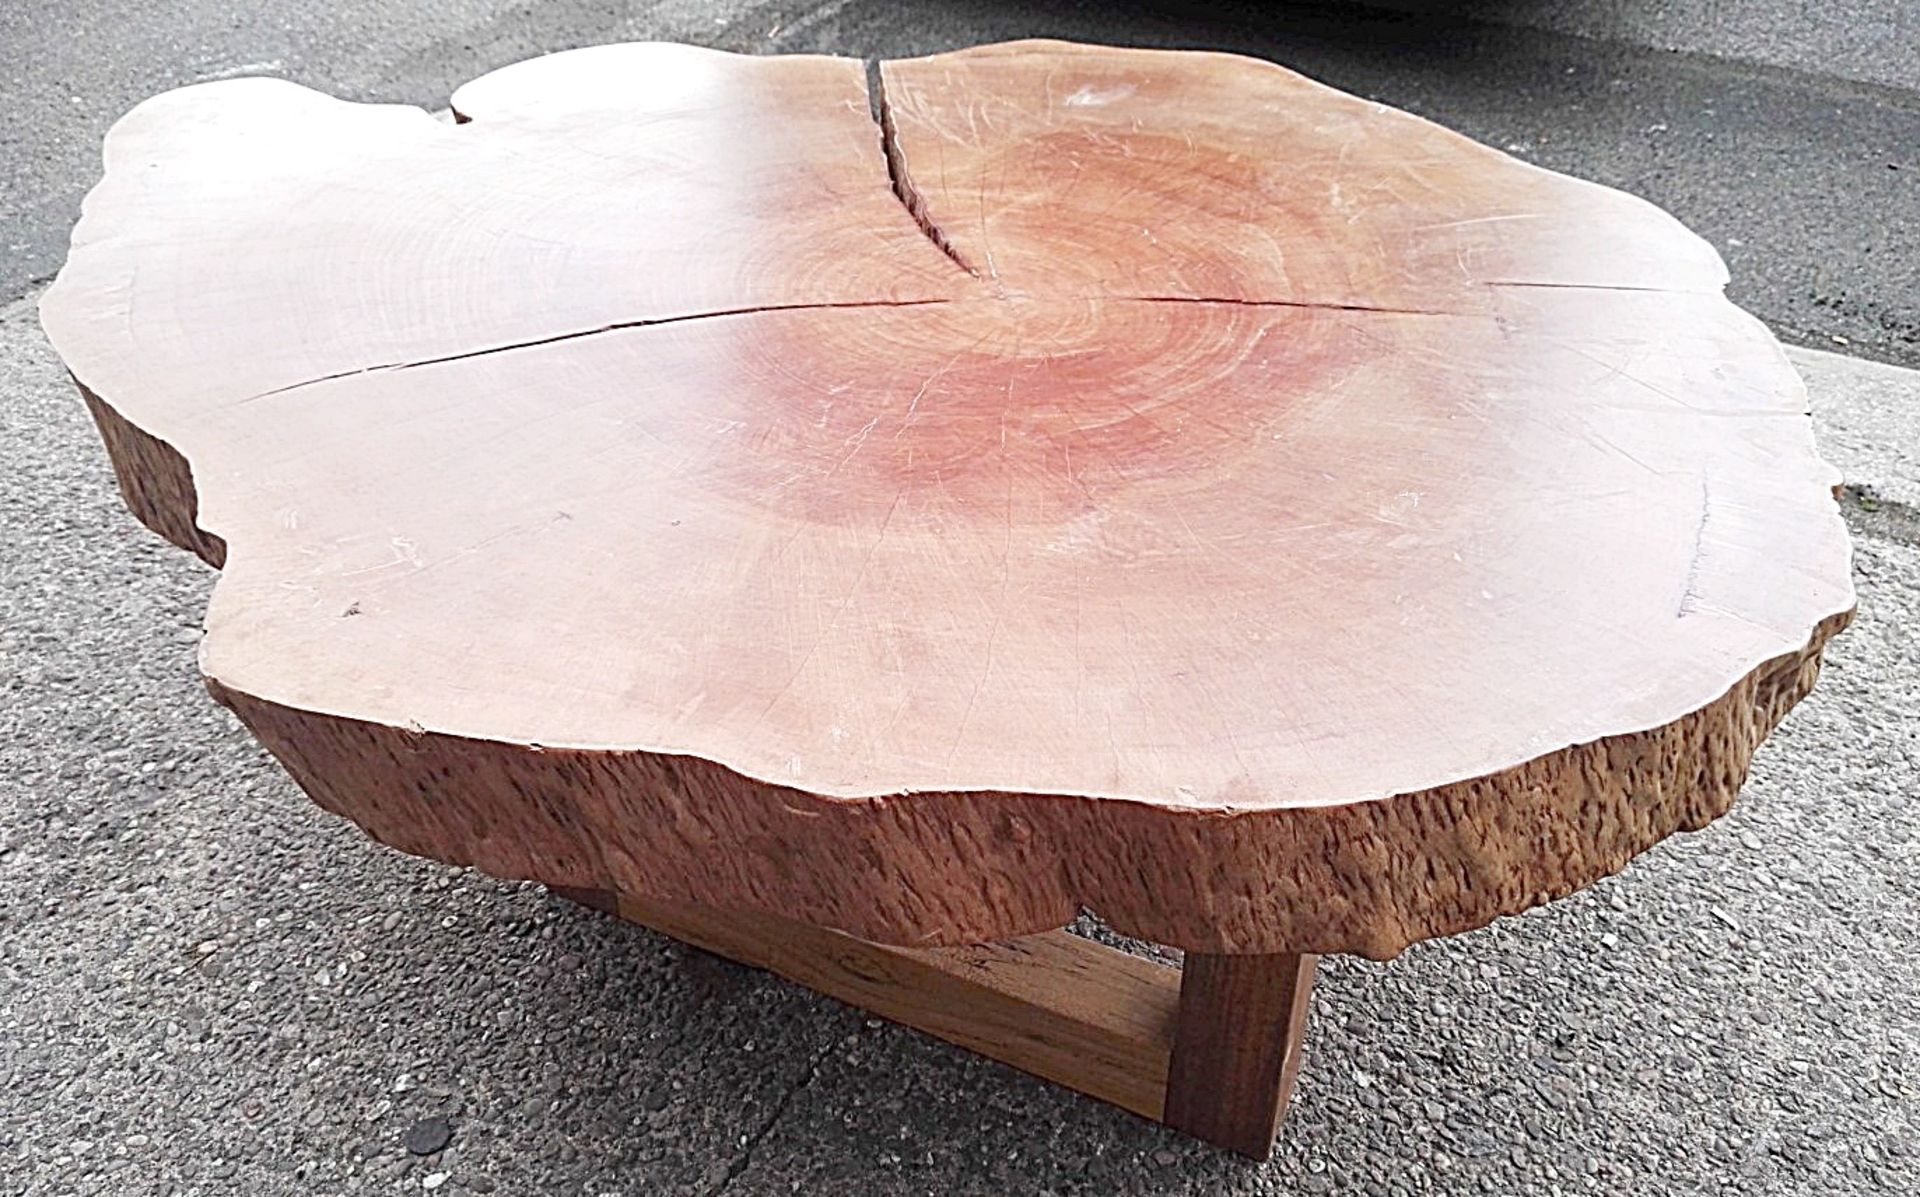 1 x Unique Reclaimed Solid Tree Trunk Coffee Table - Dimensions (approx): W152 x D129 x H63.3cm - Image 6 of 6